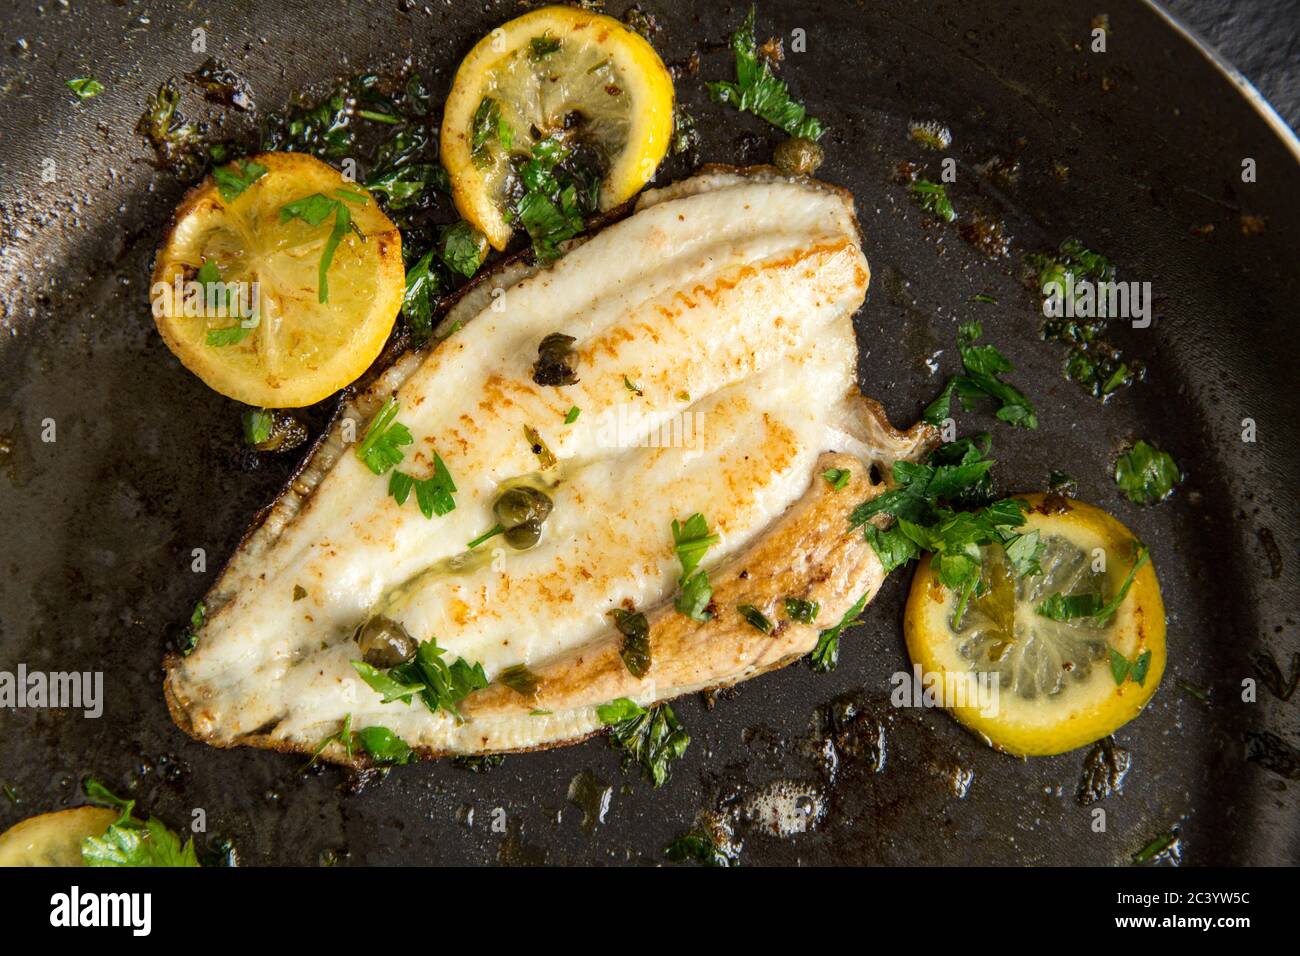 A home cooked fillet of lemon sole, Microstomus kitt, that has been pan fried in butter with lemon slices, capers and parsley. Dorset England UK GB Stock Photo